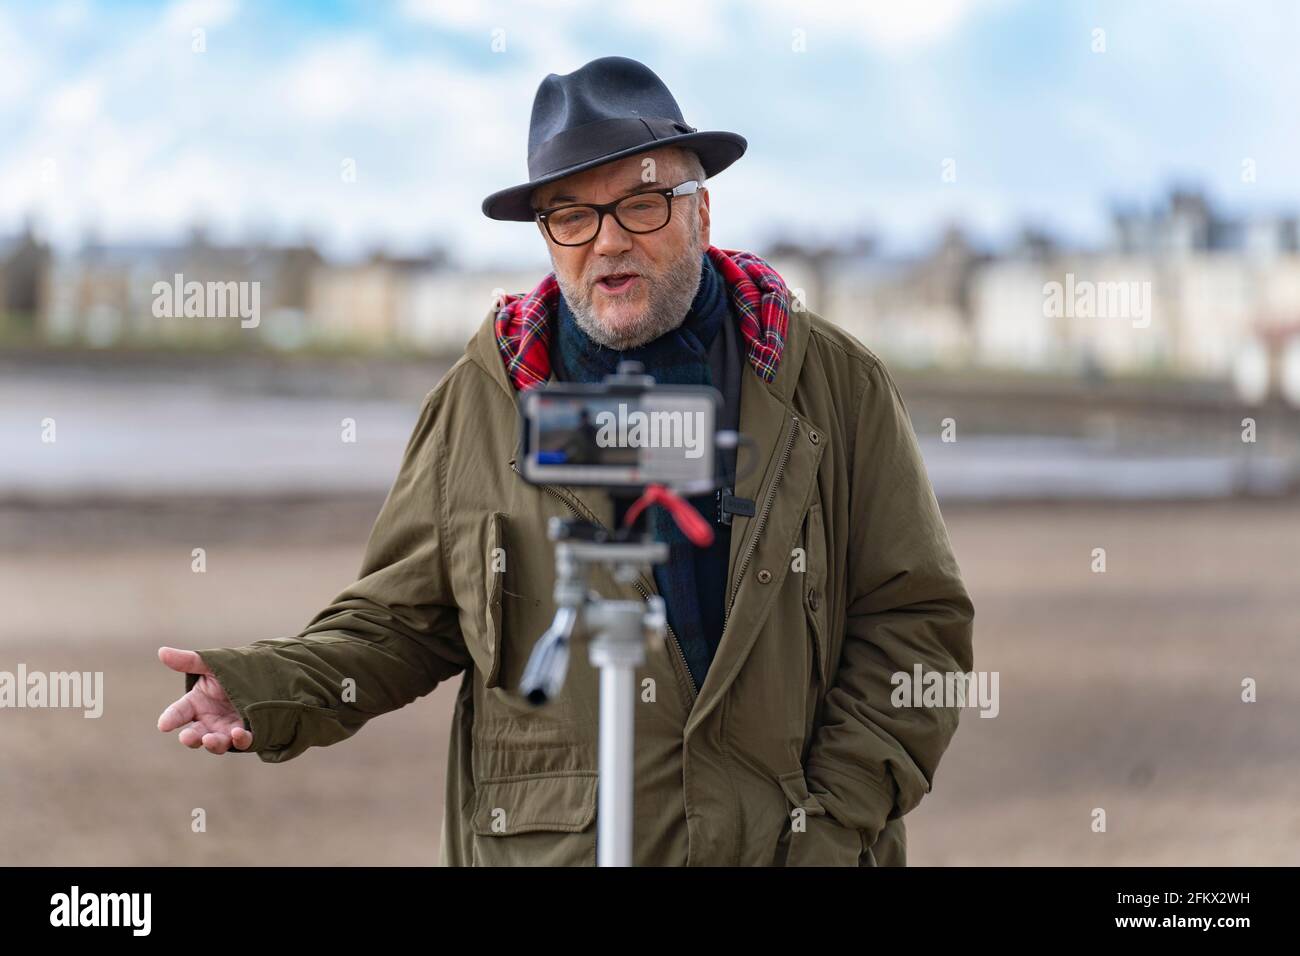 Troon, Scotland, UK. 4 May 2021. Founder of  pro Union All for Unity party George Galloway campaigns on the beach promenade in Troon in Ayrshire. Galloway made a live streamed speech and met with supporters and members of the public. He had lunch of fish and chips at The Wee Hurrie takeaway restaurant beside Troon harbour. Iain Masterton/Alamy Live News Stock Photo